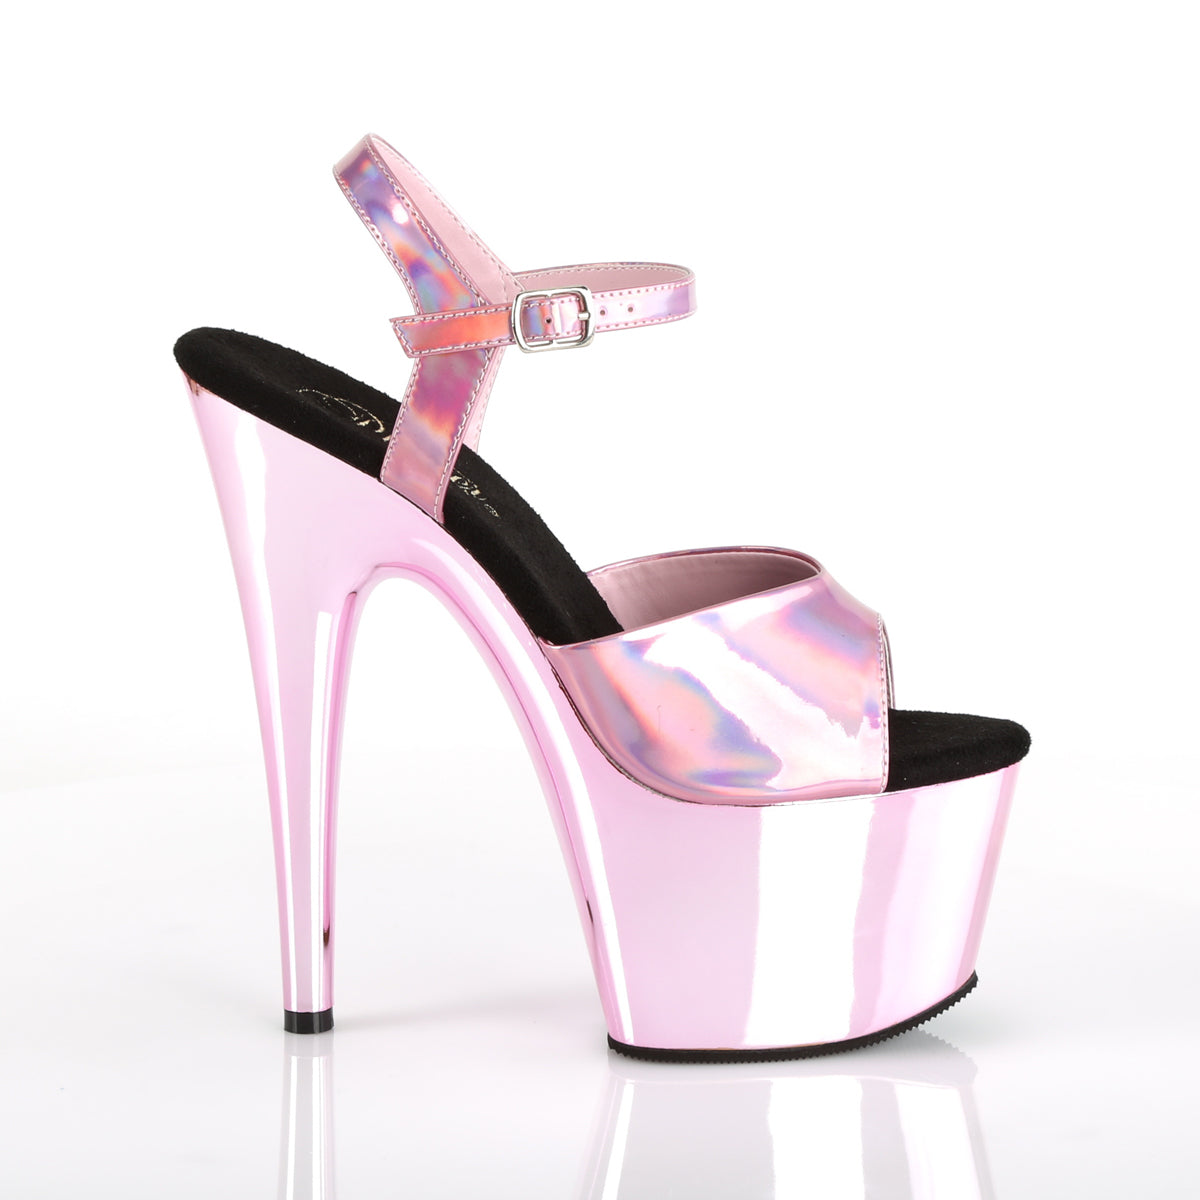 ADORE-709HGCH Pleaser 7" Heel Baby Pink Pole Dancing Shoes-Pleaser- Sexy Shoes Fetish Heels